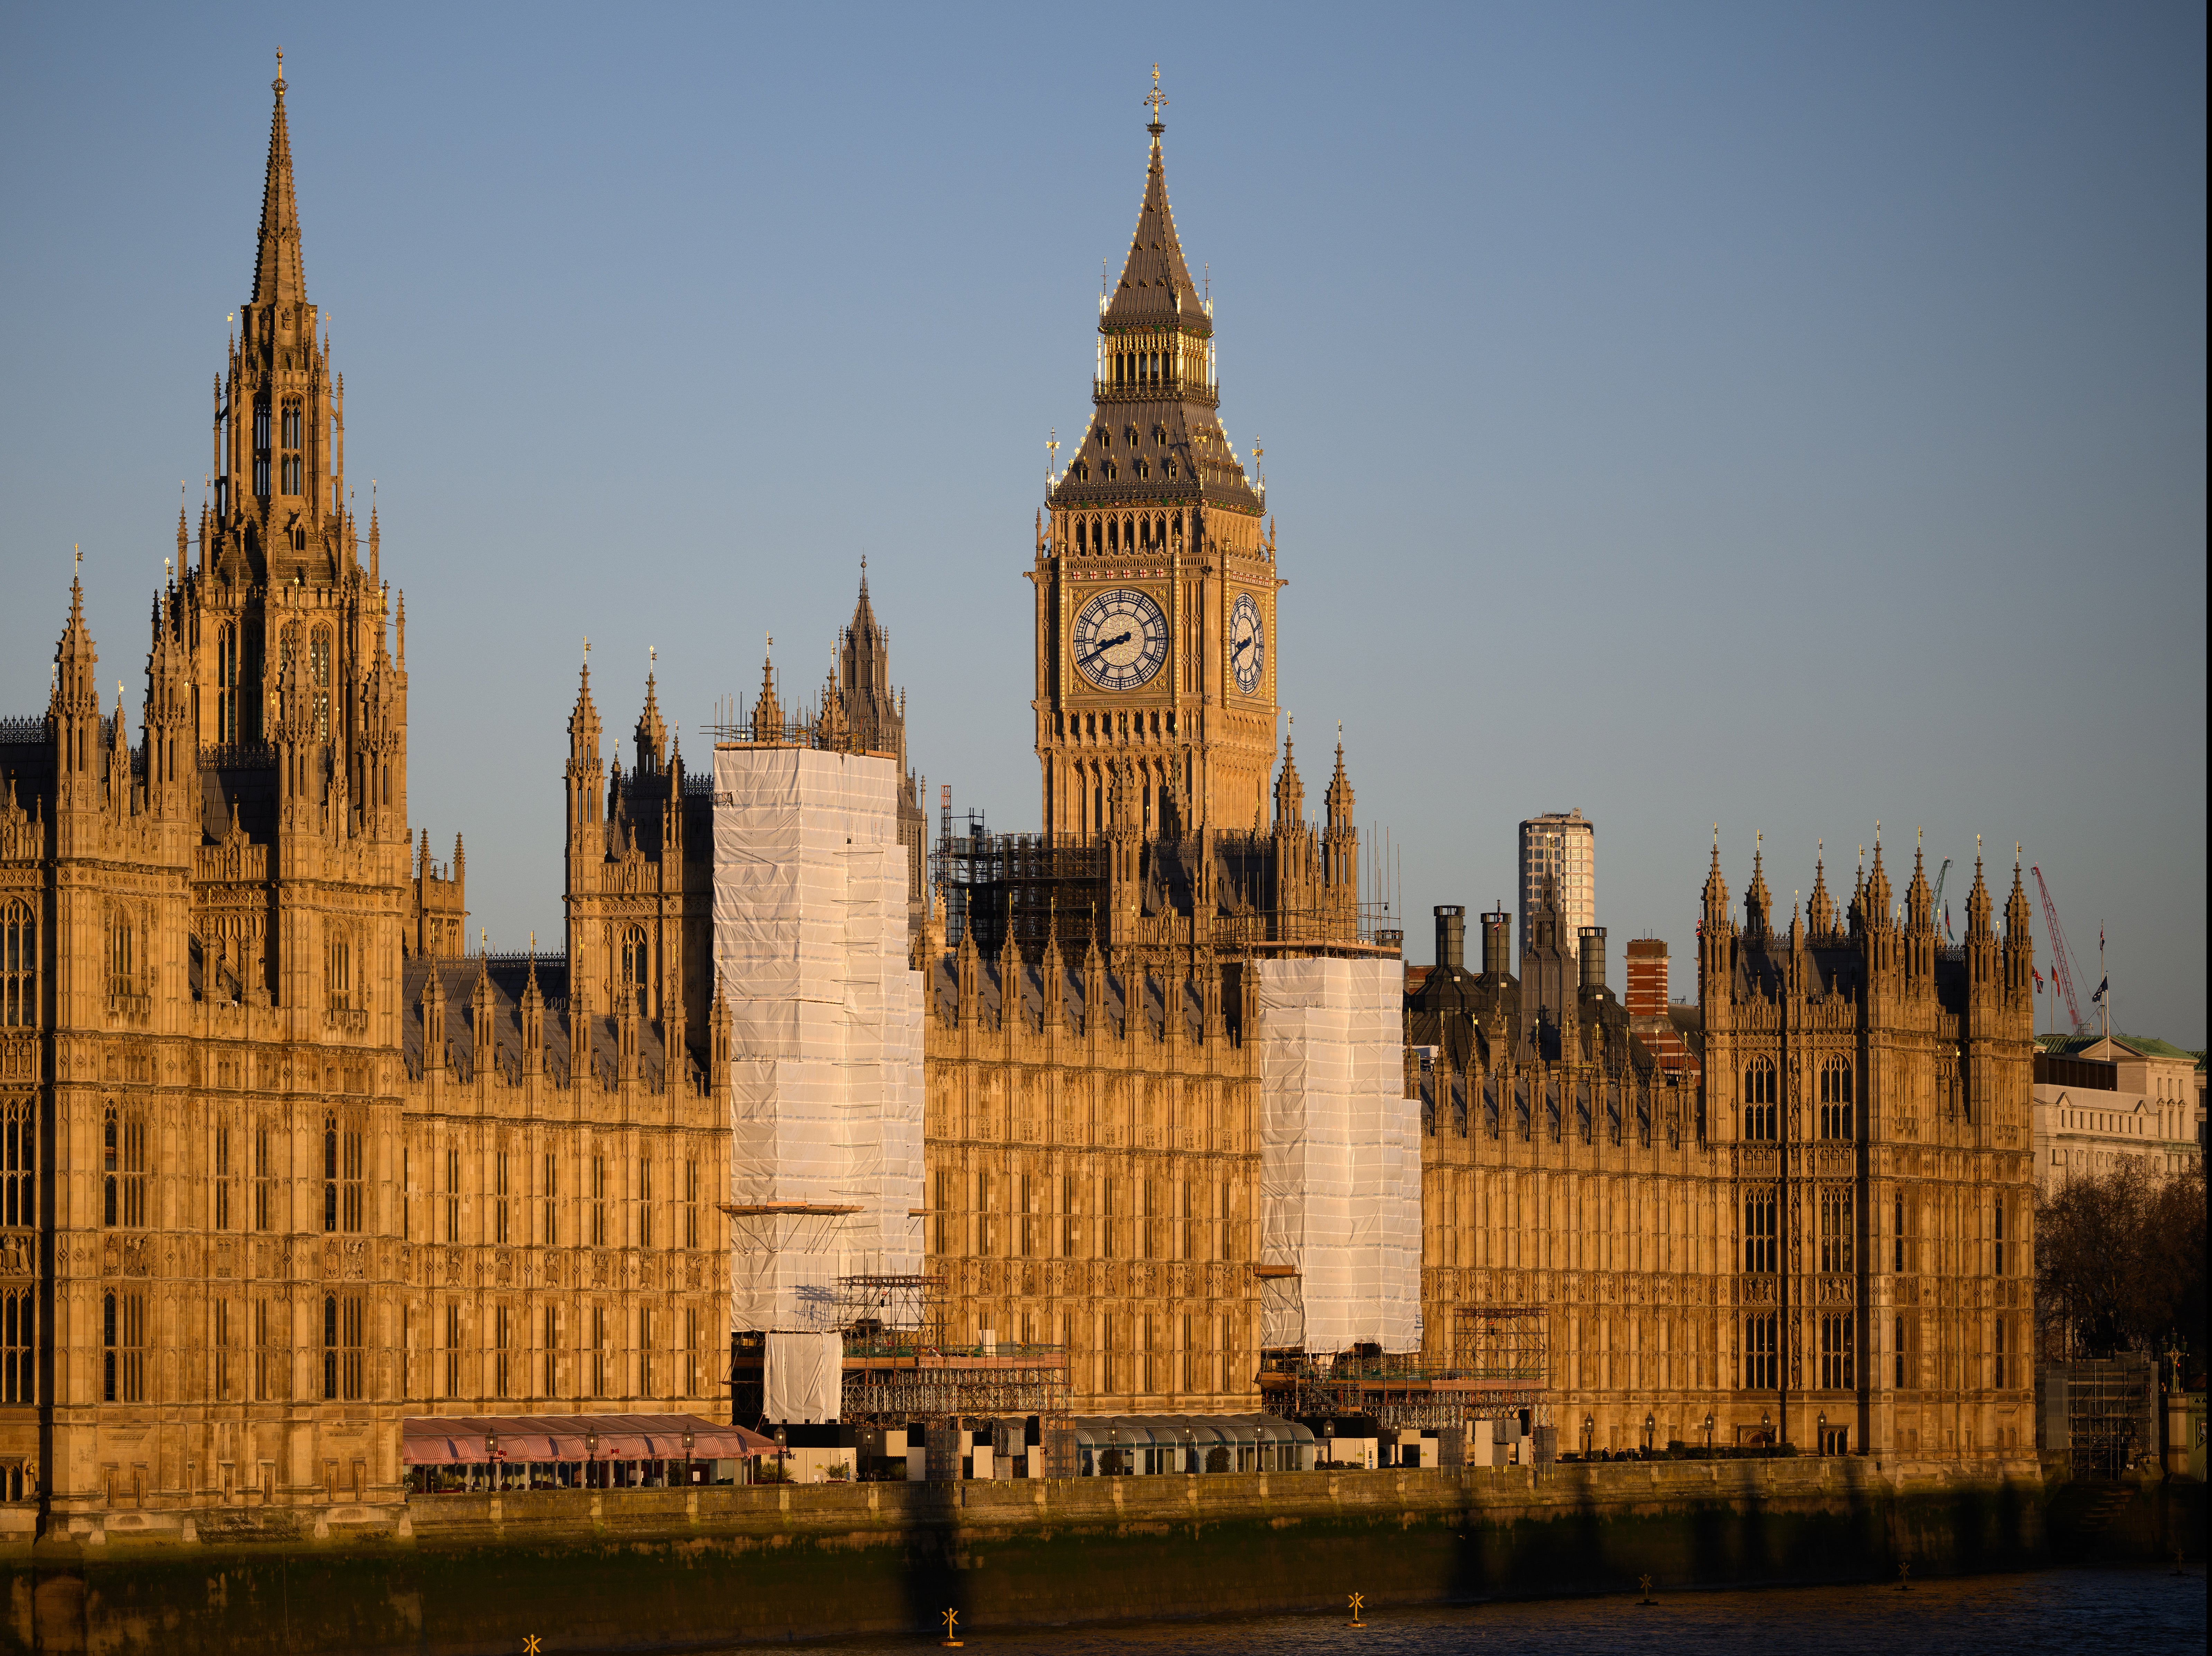 The Palace of Westminster is in a poor state of repair